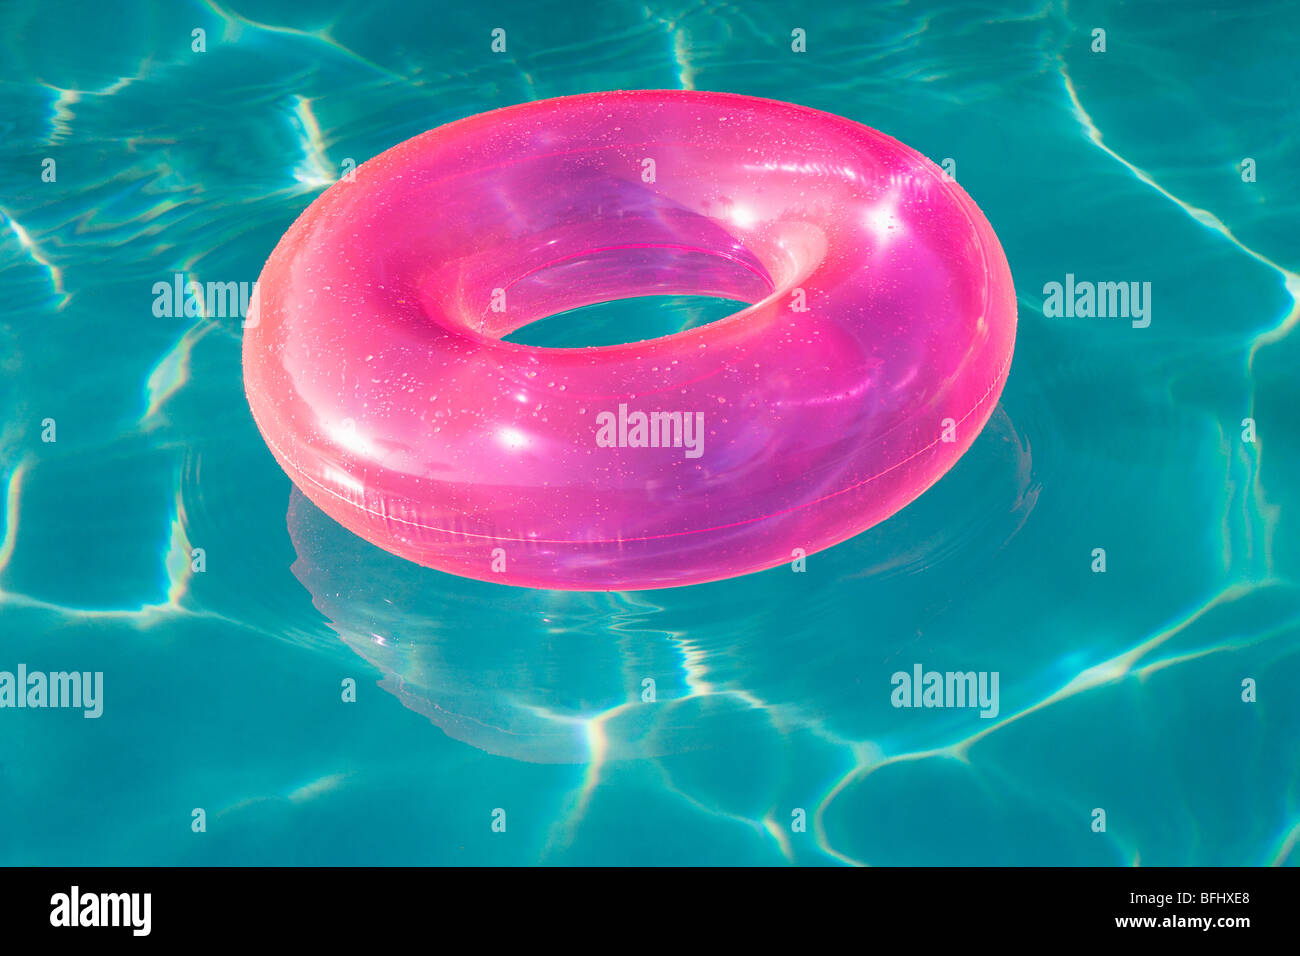 Pink Float Tube Floating in Swimming Pool Stock Photo - Alamy